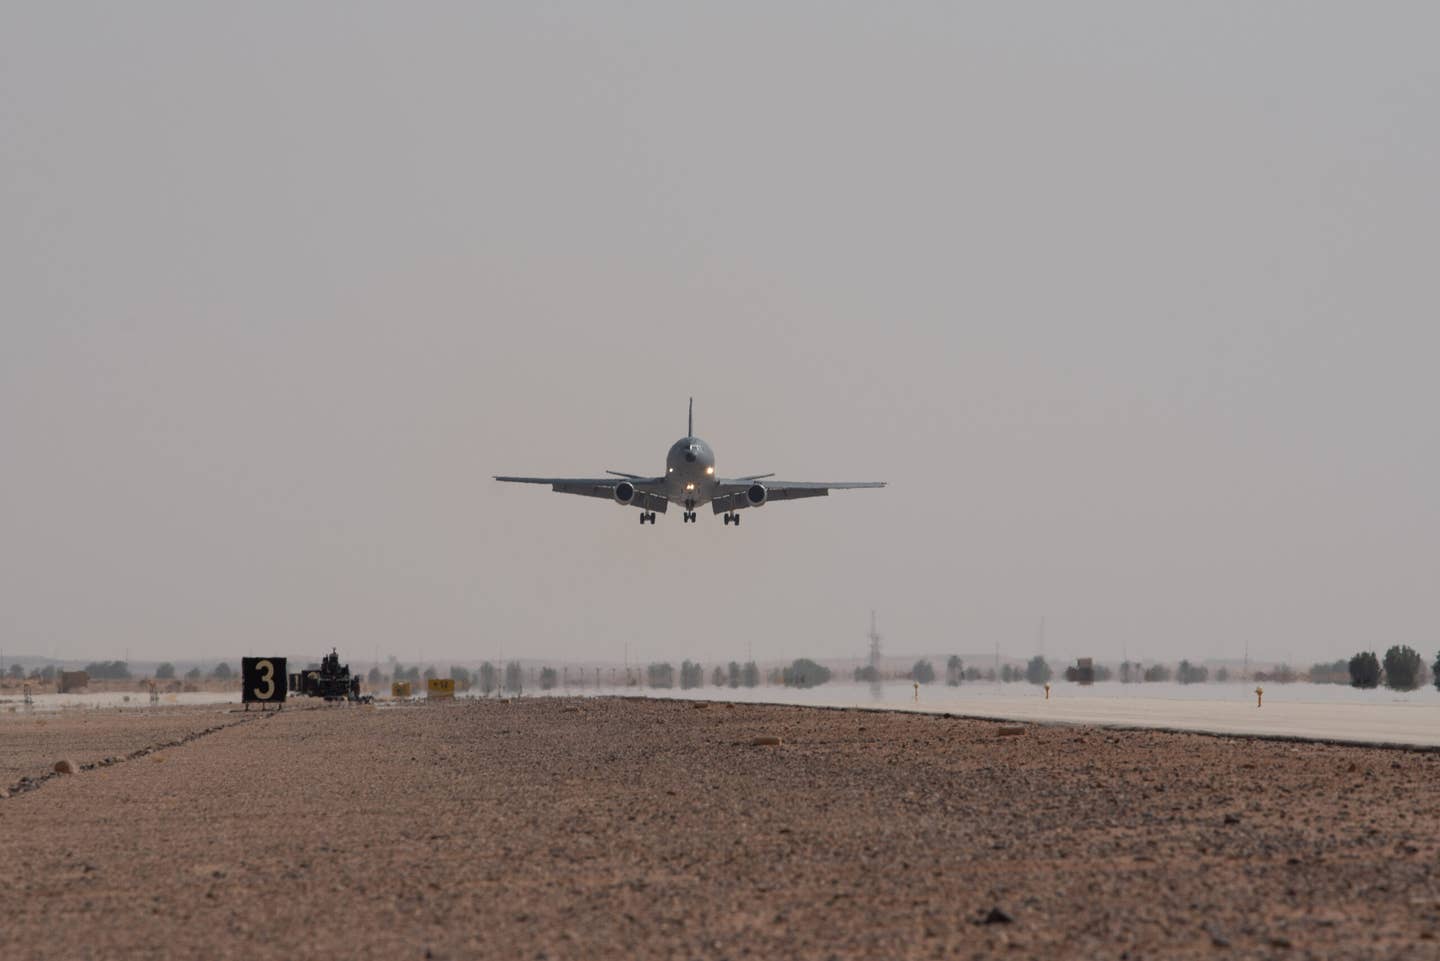 A KC-10 Extender assigned to the 908th Air Refueling Squadron on approach to land after conducting the final combat sortie for the Extender before squadron inactivation at Prince Sultan Air Base, Saudi Arabia, Oct. 3, 2023. <em>U.S. Air Force photo by Tech. Sgt. Alexander Frank</em>